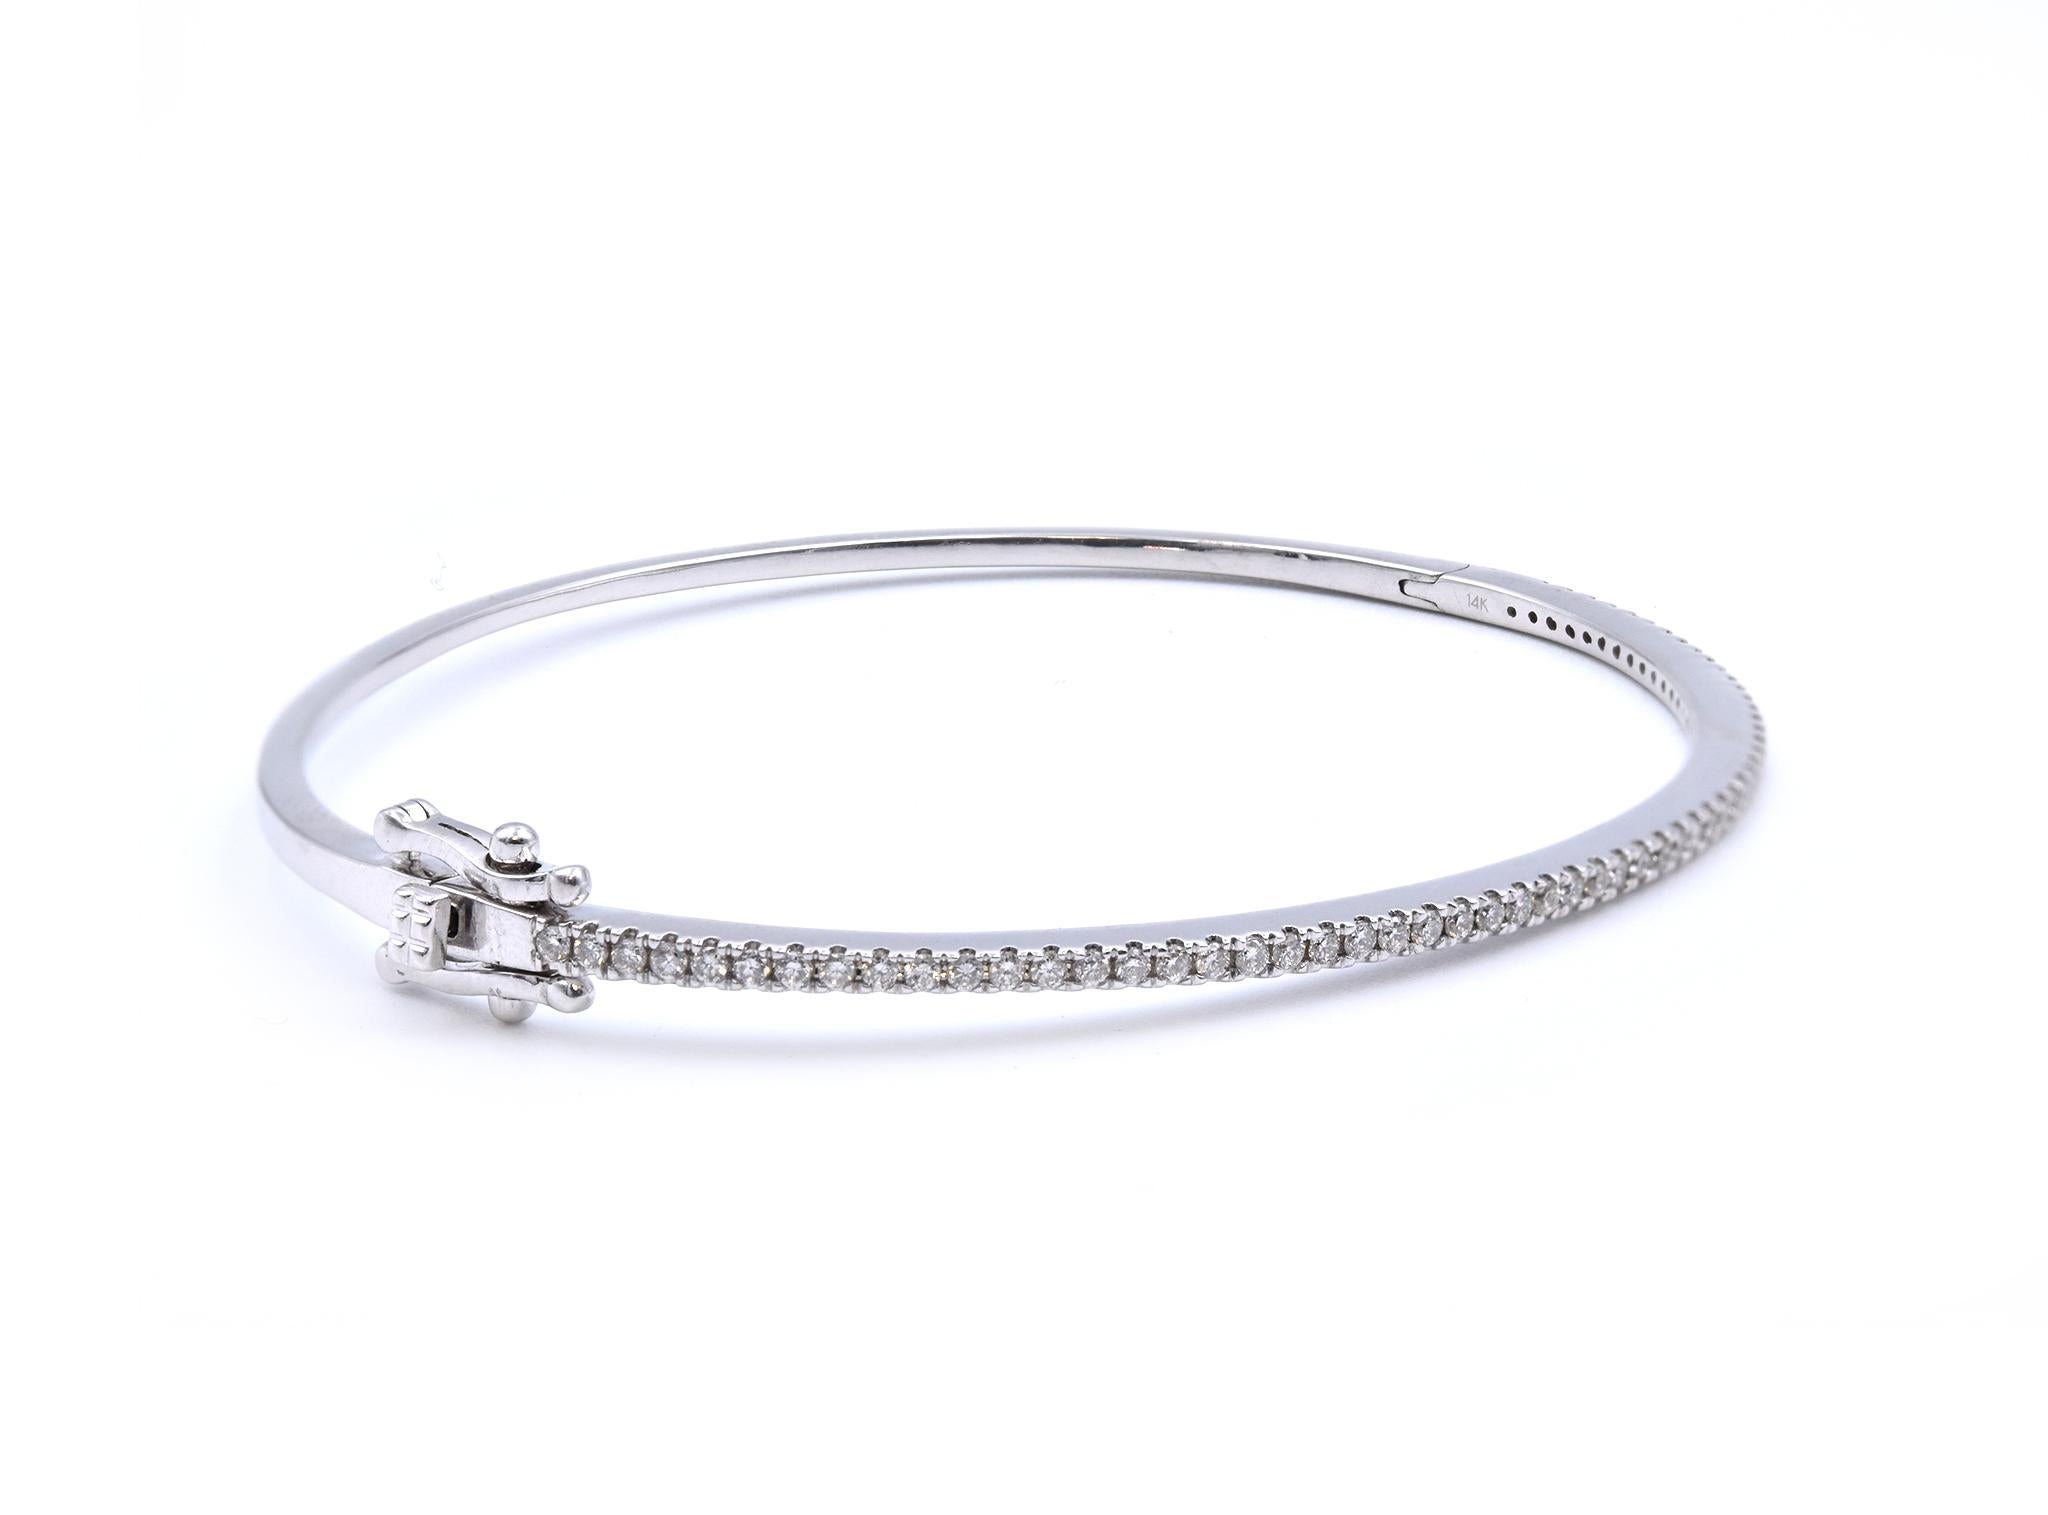 Material: 14K white gold 
Diamonds: 52 round brilliant cut = .52cttw
Color: G
Clarity: VS
Dimensions: bracelet will fit up to a 7-inch wrist
Weight: 8.60 grams